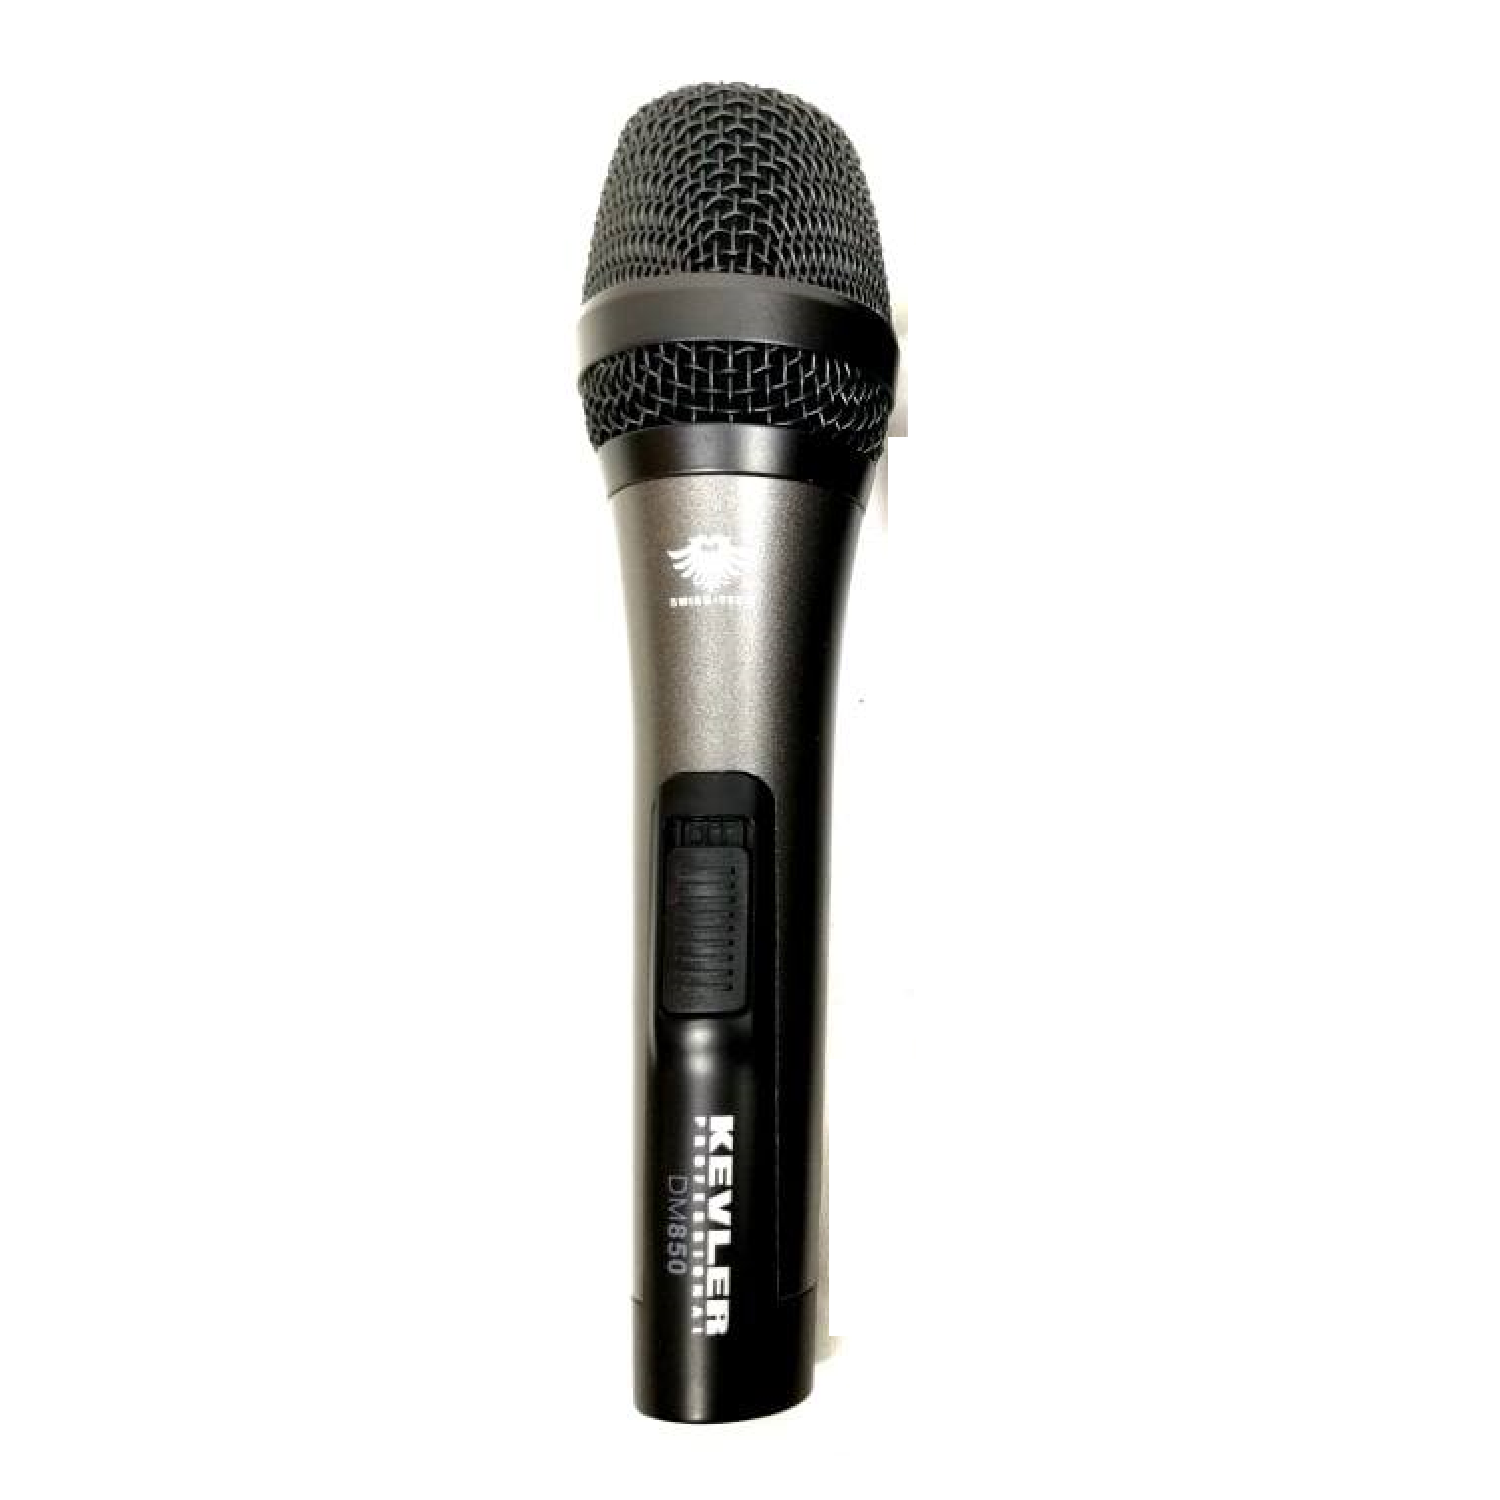 Supercardioid Dynamic Microphone with 10 Meters Cable   DM850 kevler